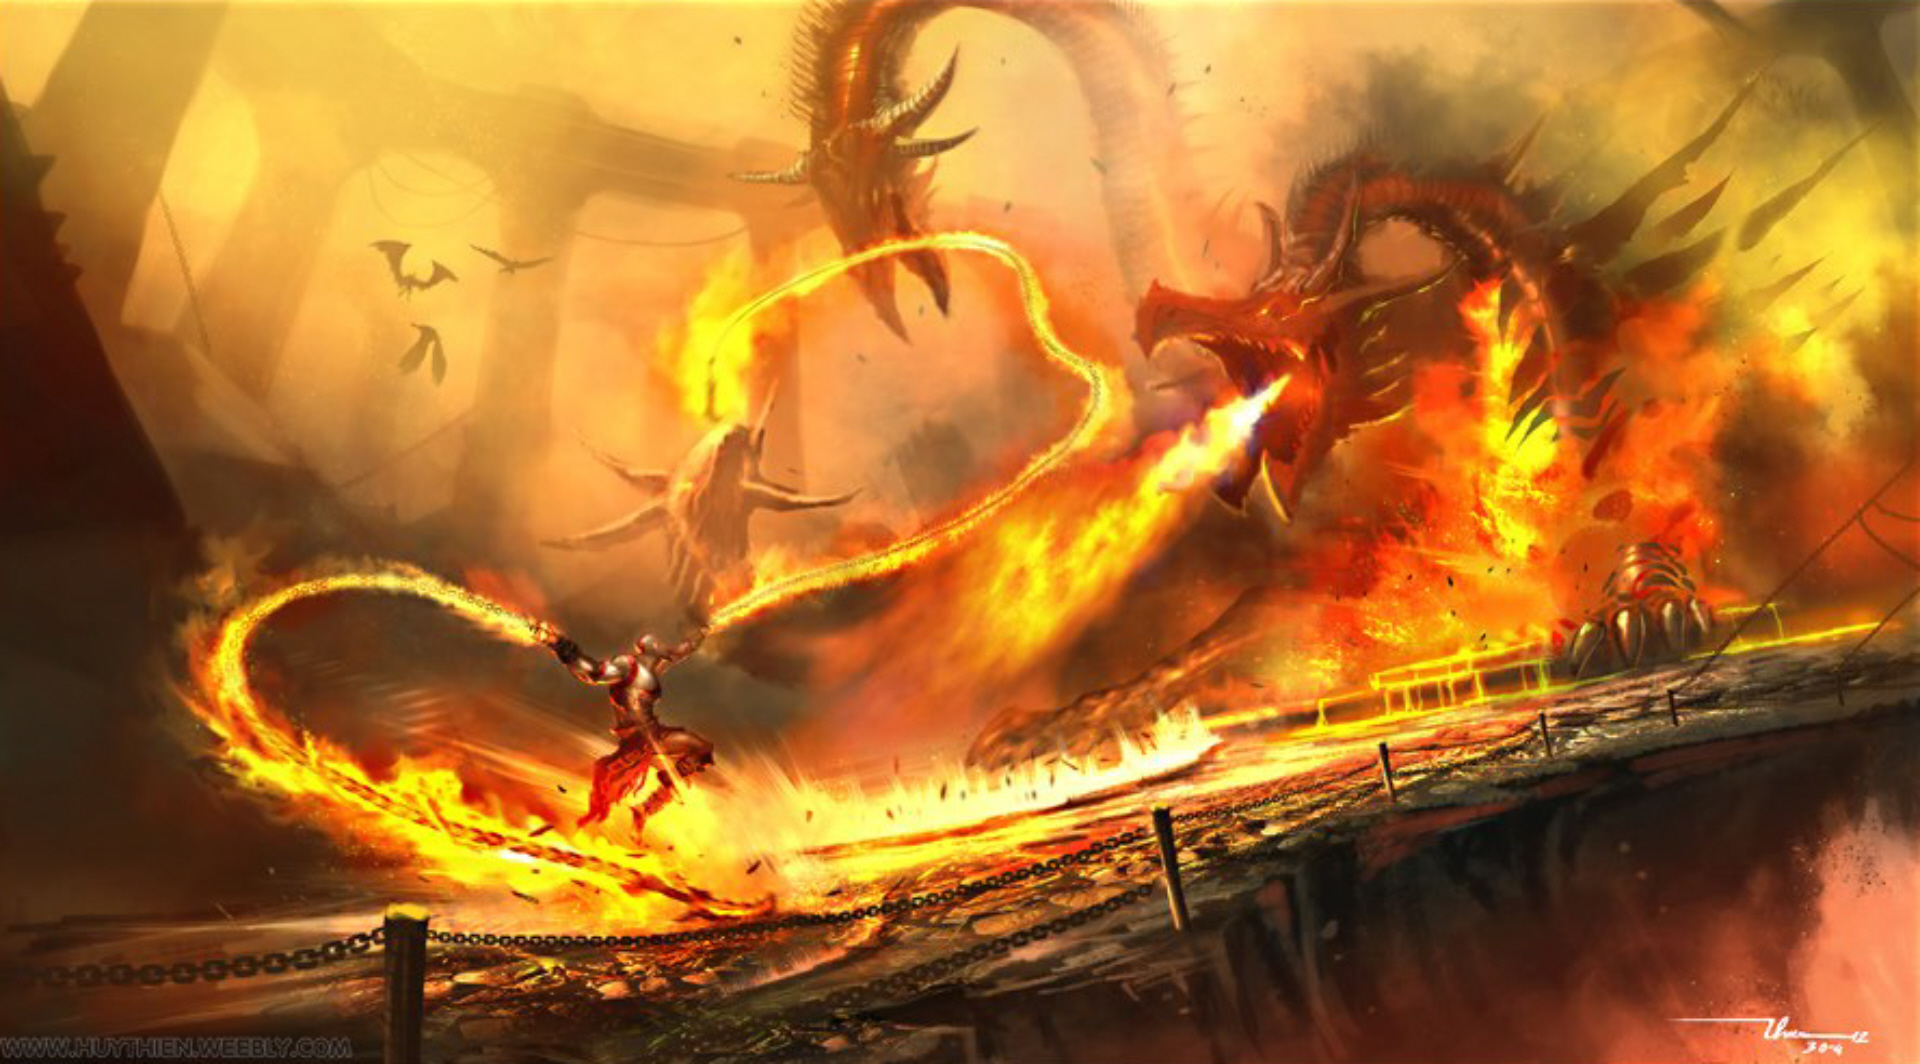 Videogame Photo Of The Day Epic God War Dragon